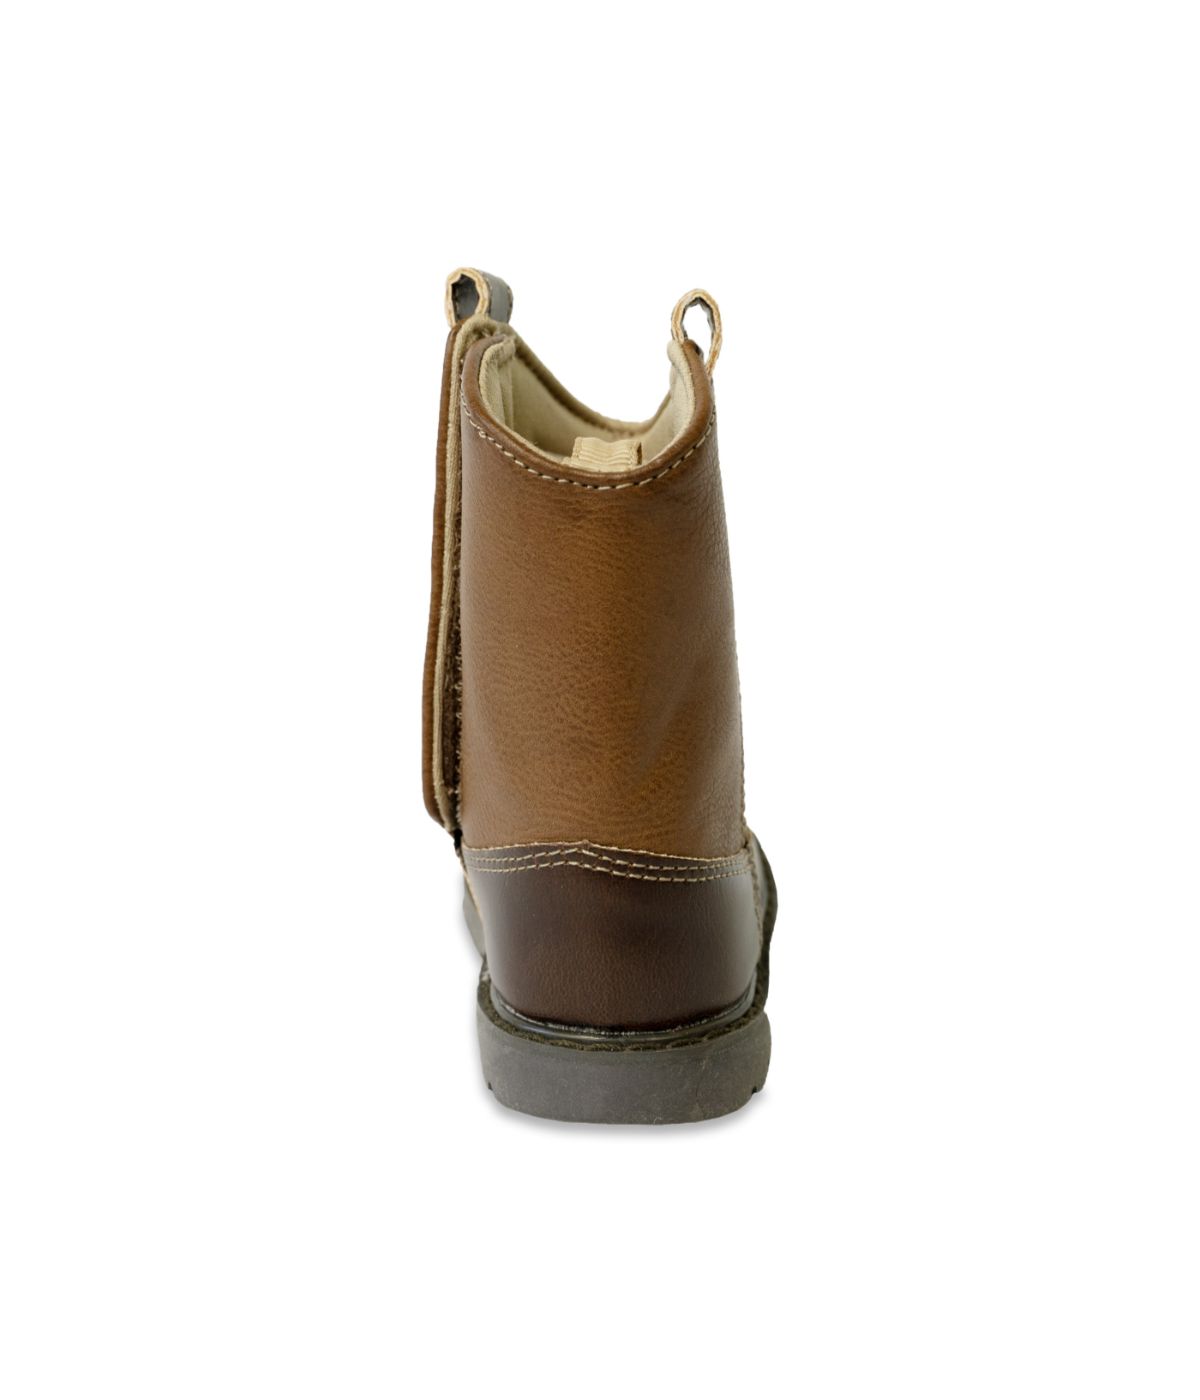 Infant Brown Western Boot 1